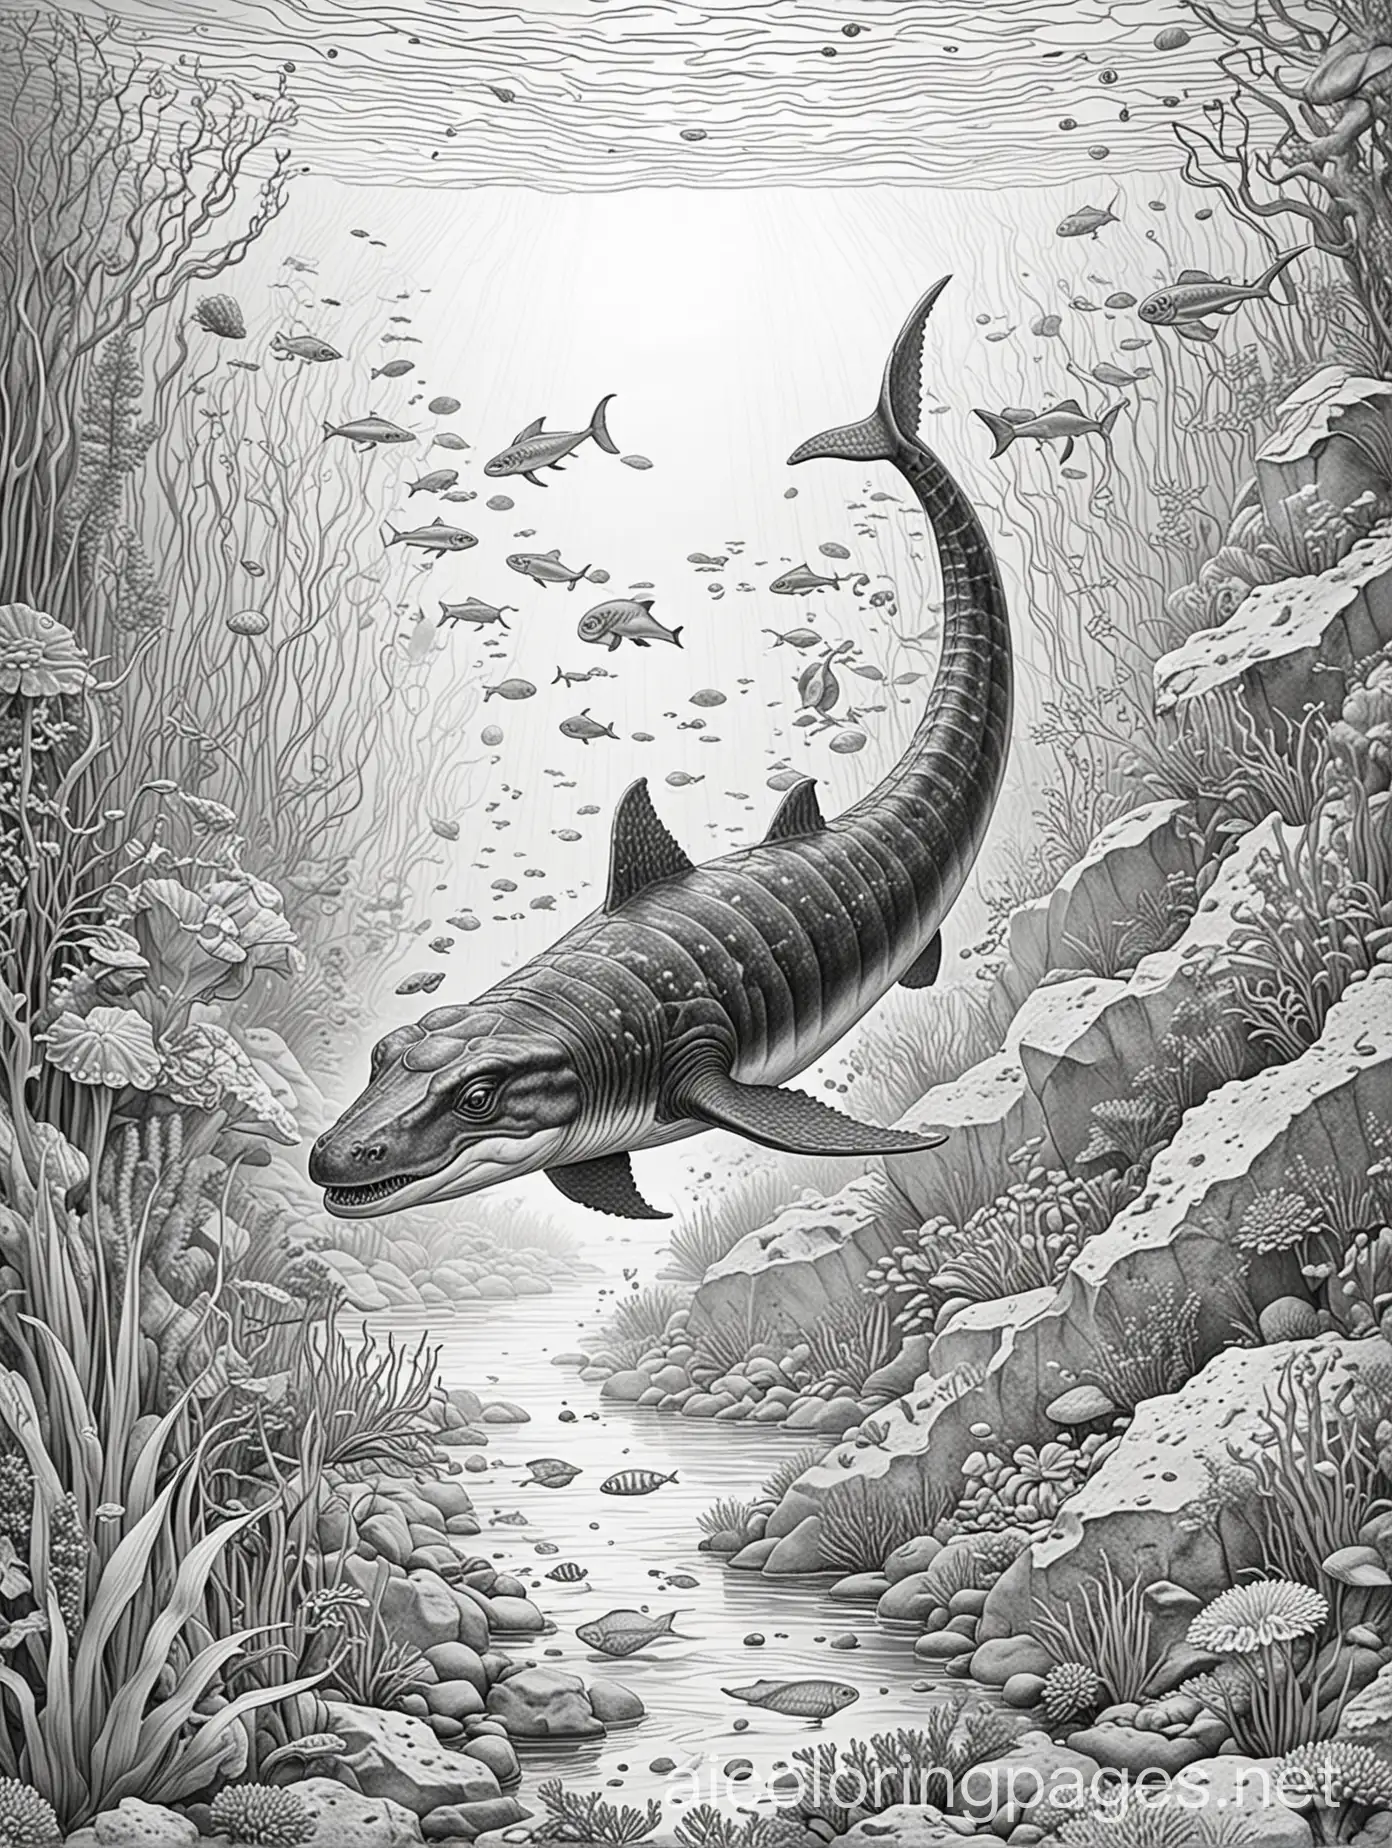 Create a coloring page of an Elasmosaurus in a prehistoric aquatic environment for a children's coloring book. The scene must include the following elements: Elasmosaurus: Central in the image, Elasmosaurus should be swimming gracefully with its long neck extended, highlighting its slender shape and fin details. Environment: An underwater setting with aquatic plants, corals, and other elements from the bottom of the sea. Add prehistoric fish swimming around. Details: Include small elements like rocks, shells, and perhaps other small marine animals to enrich the scene., Coloring Page, black and white, line art, white background, Simplicity, Ample White Space. The background of the coloring page is plain white to make it easy for young children to color within the lines. The outlines of all the subjects are easy to distinguish, making it simple for kids to color without too much difficulty